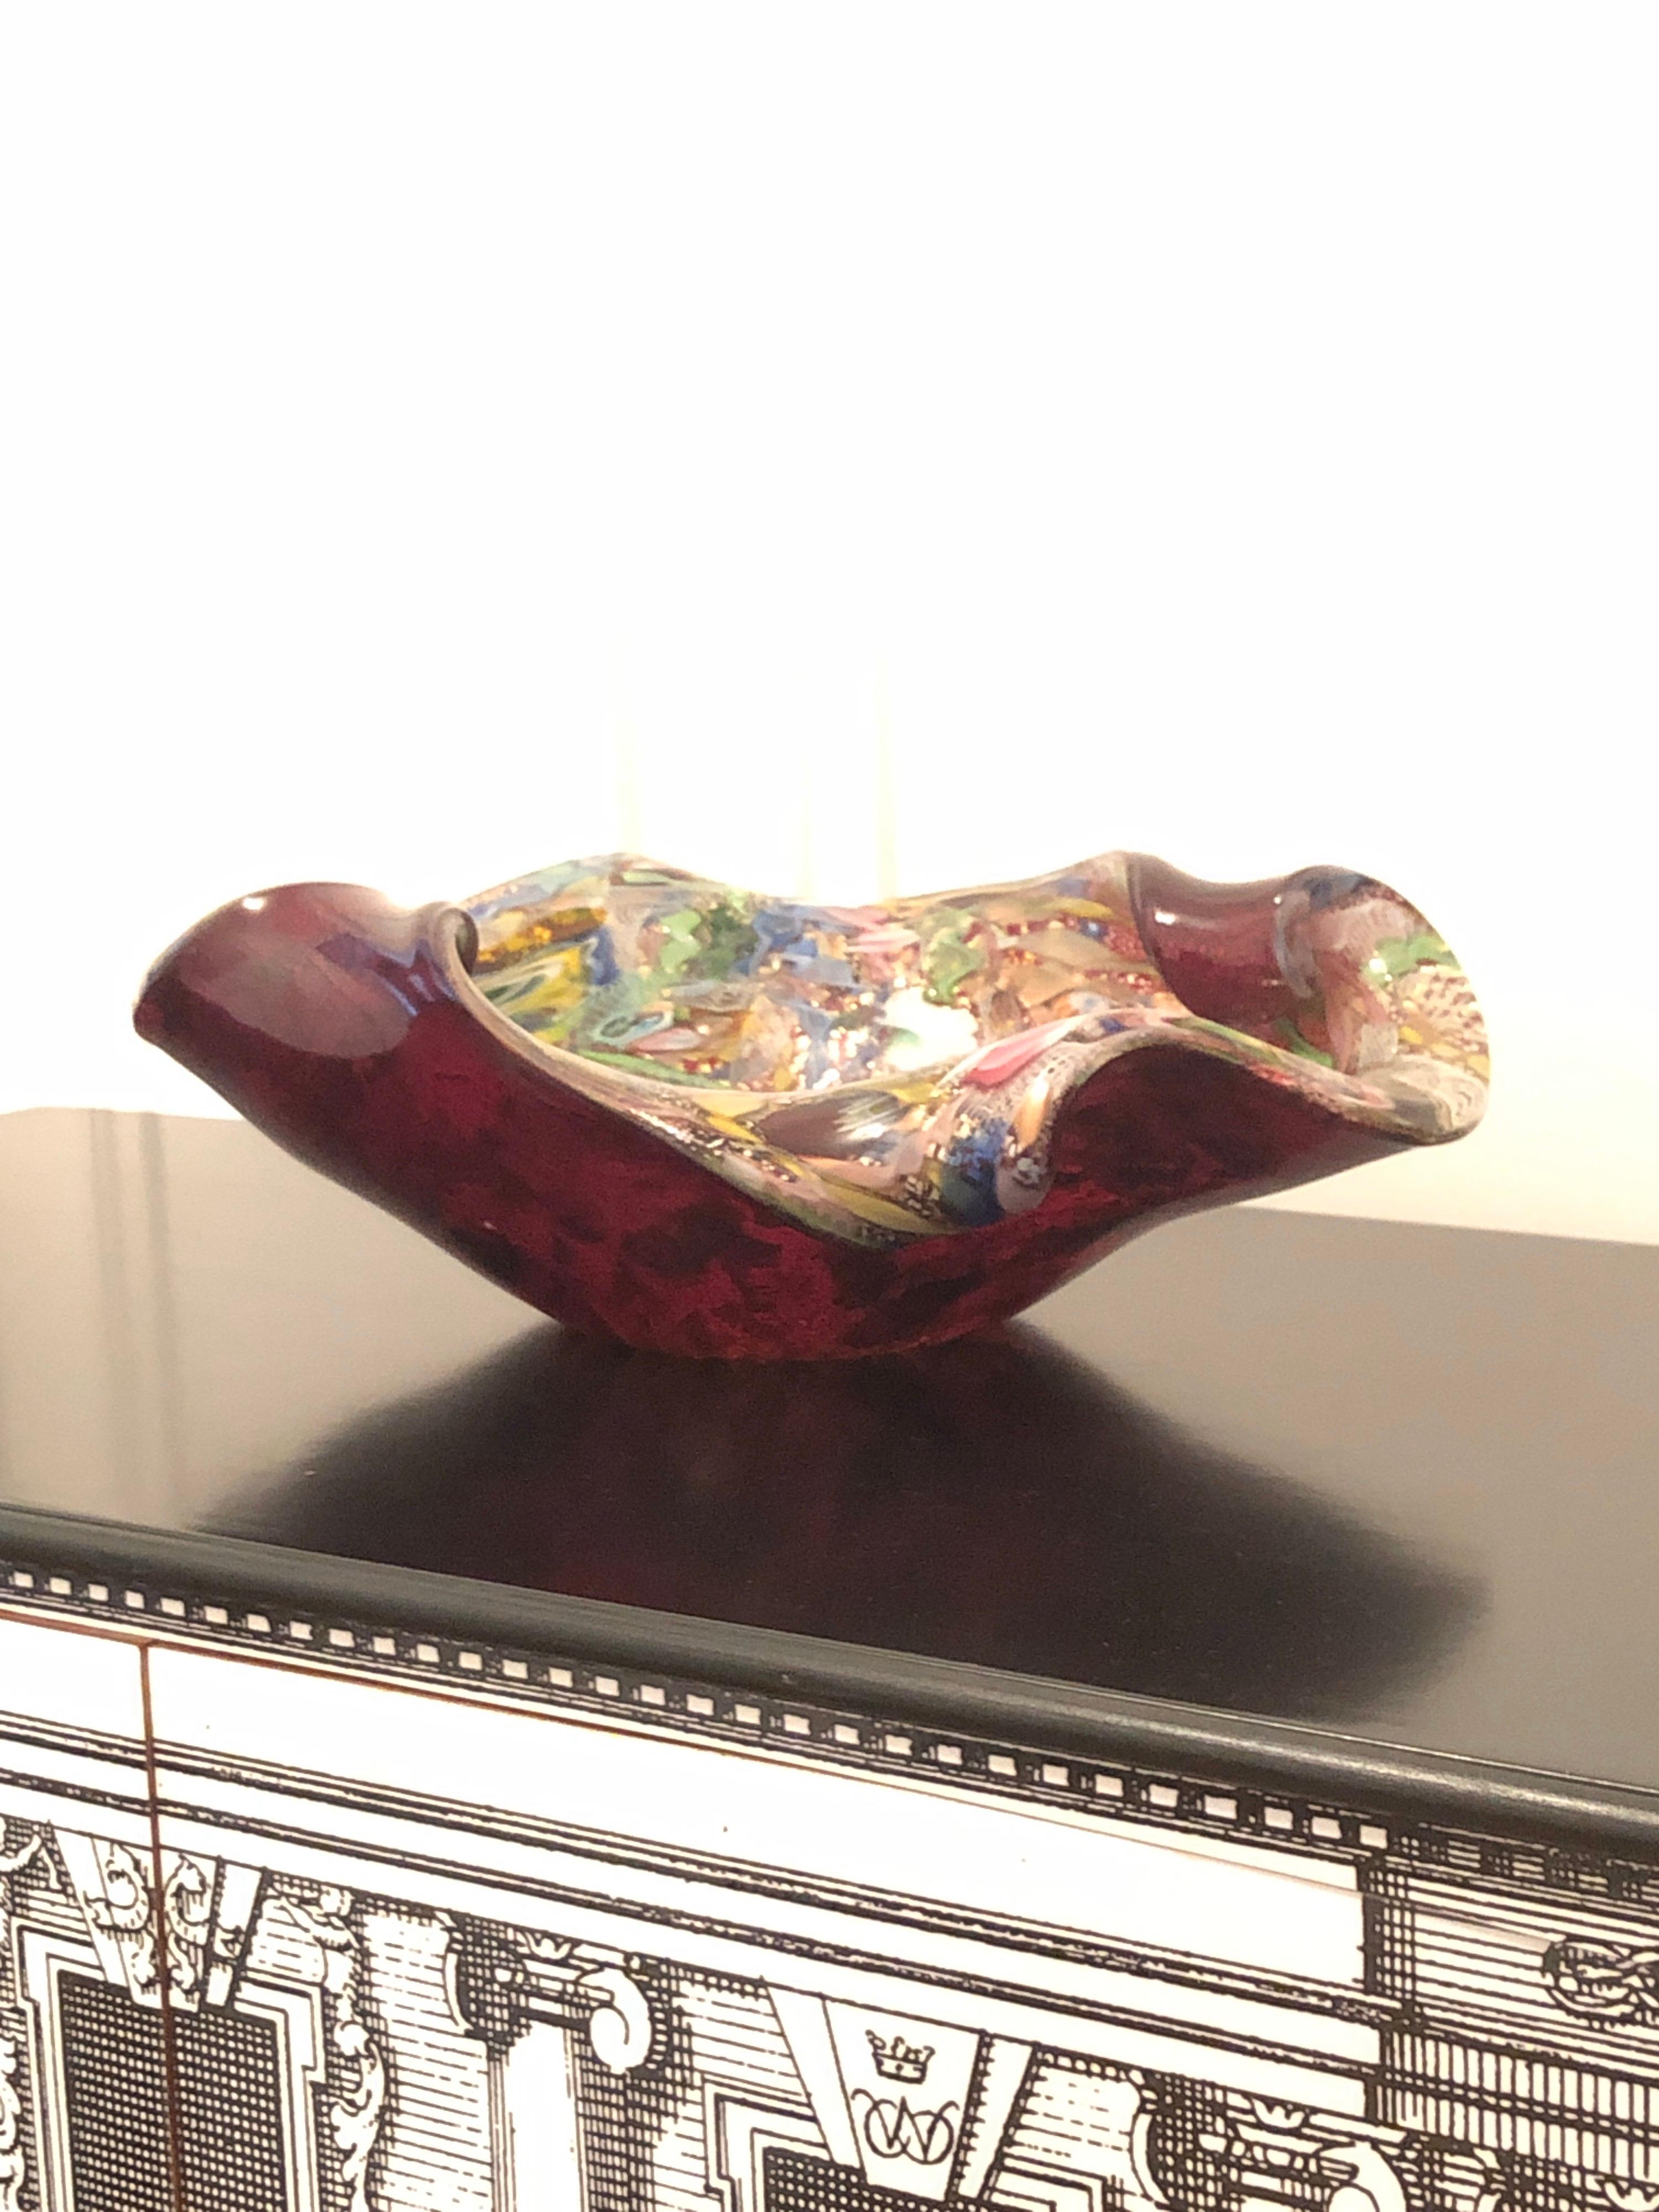 Dino Martens multicolored Murano freeform glass bowl - vide poche Murrine Murano
Born in Venice in 1894, Dino Martens studied painting and design at the Accademia di Belle Art in Rome. A talented artist, his paintings were exhibited at the Venice